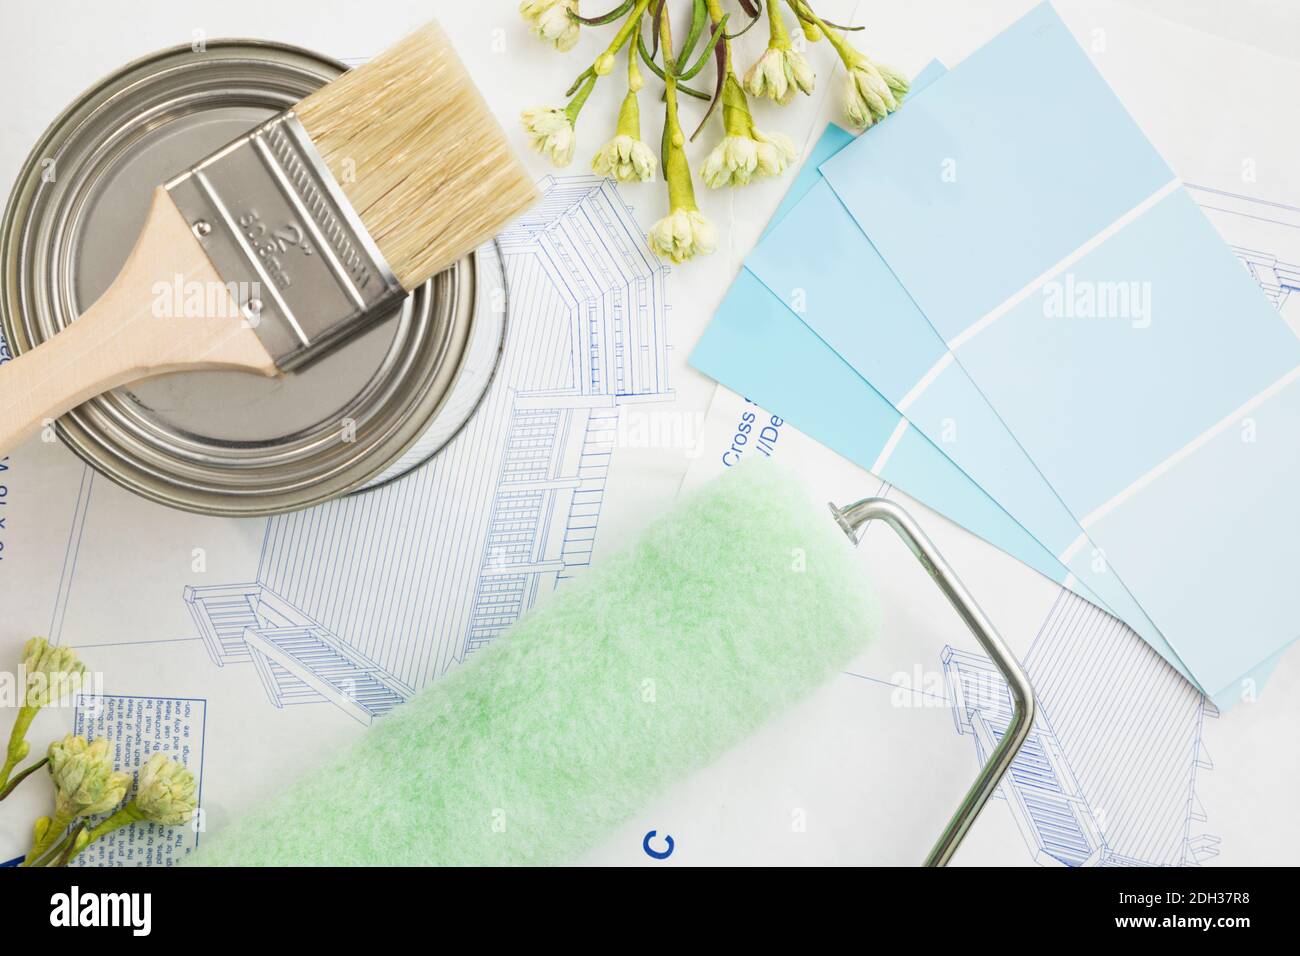 Home painting supplies for spring home improvement Stock Photo